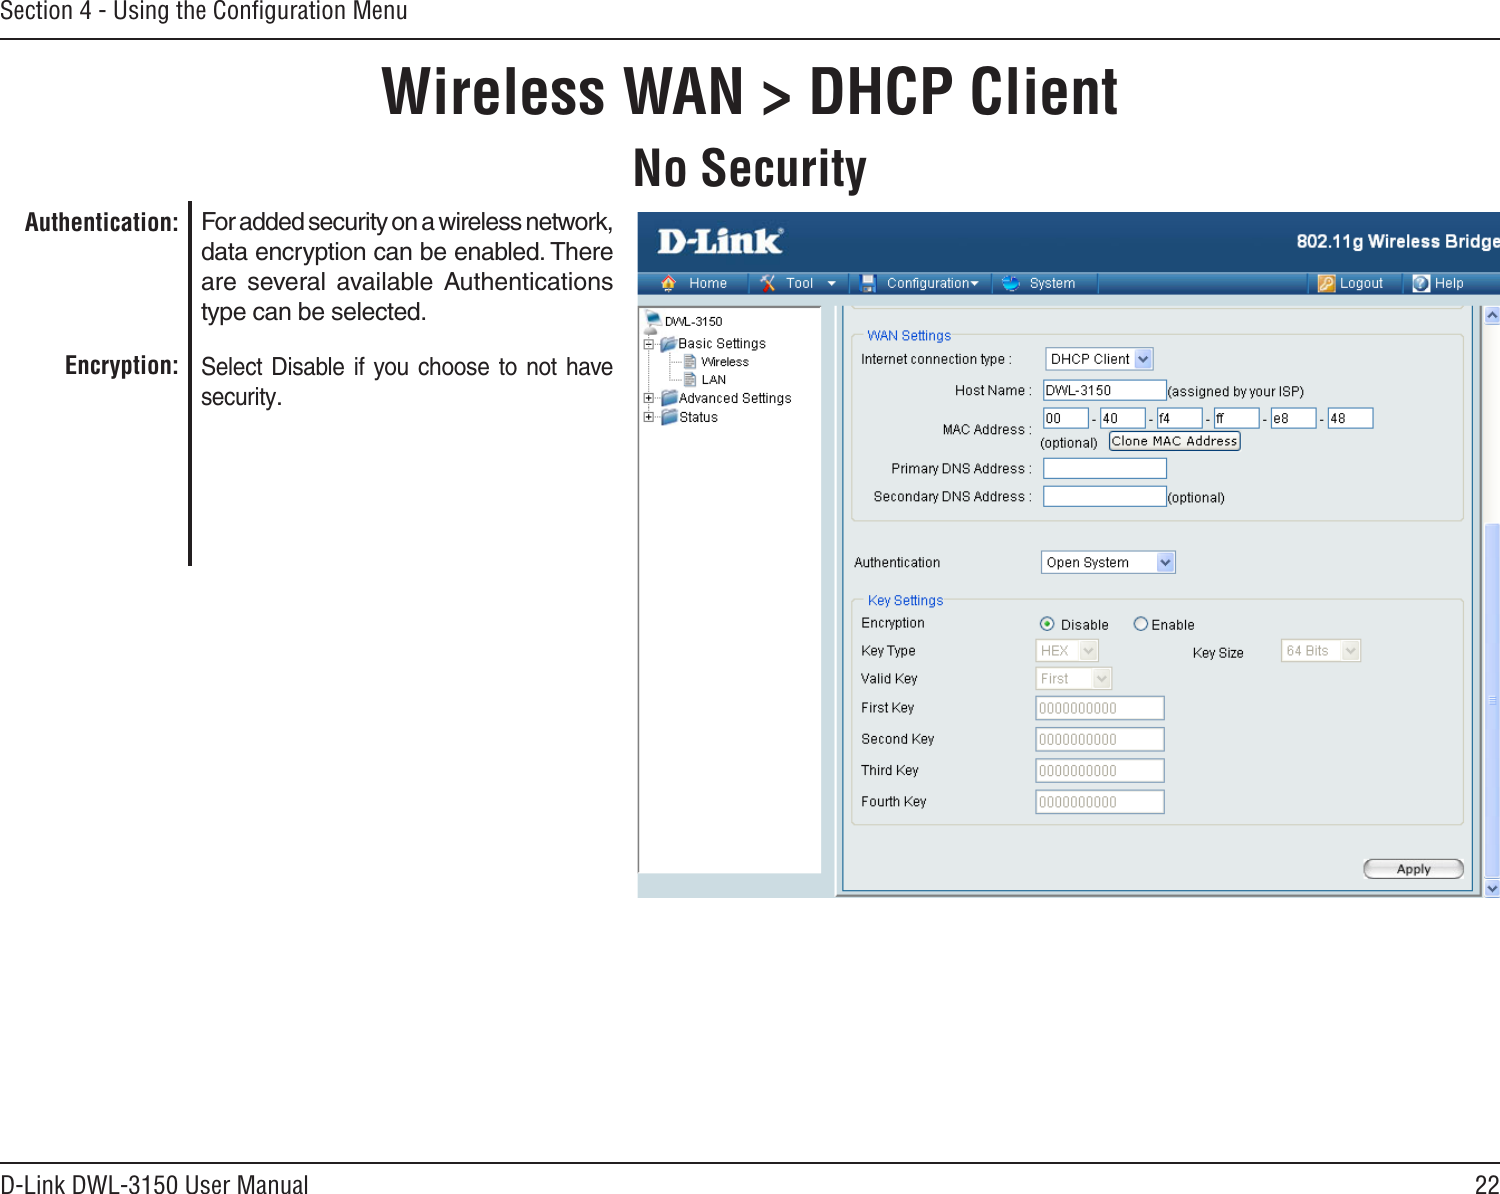 22D-Link DWL-3150 User ManualSection 4 - Using the Conﬁguration MenuNo SecurityWireless WAN &gt; DHCP ClientFor added security on a wireless network, data encryption can be enabled. There are  several  available  Authentications type can be selected. Select Disable  if you choose  to not  have security.Authentication:Encryption: